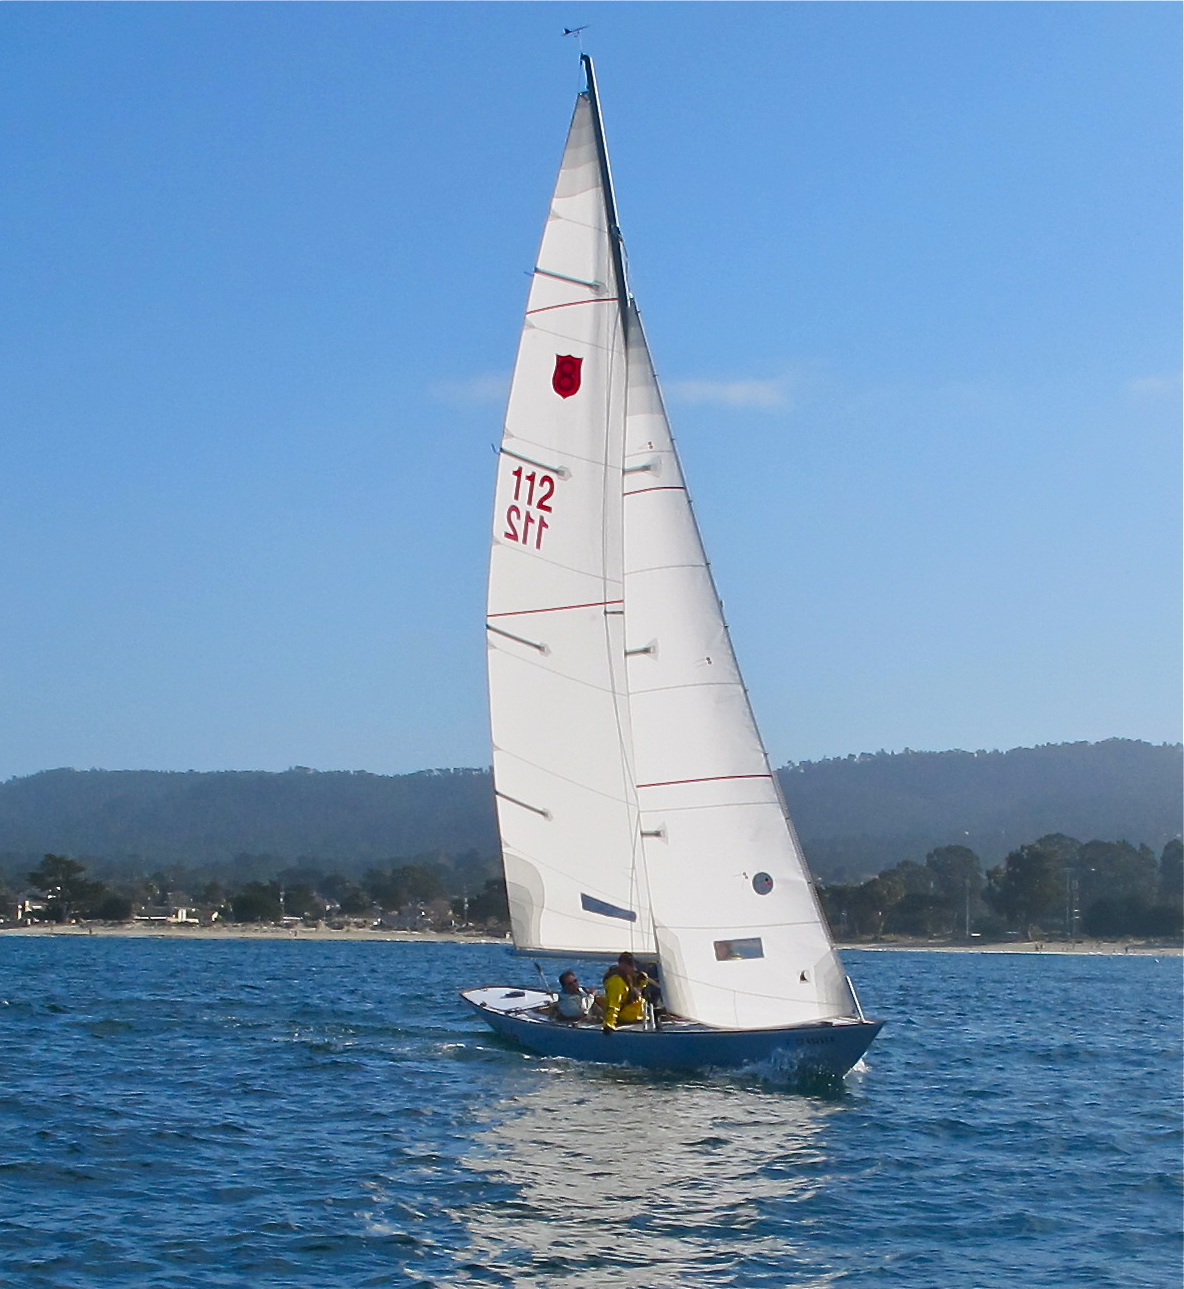 shields 30 sailboat for sale